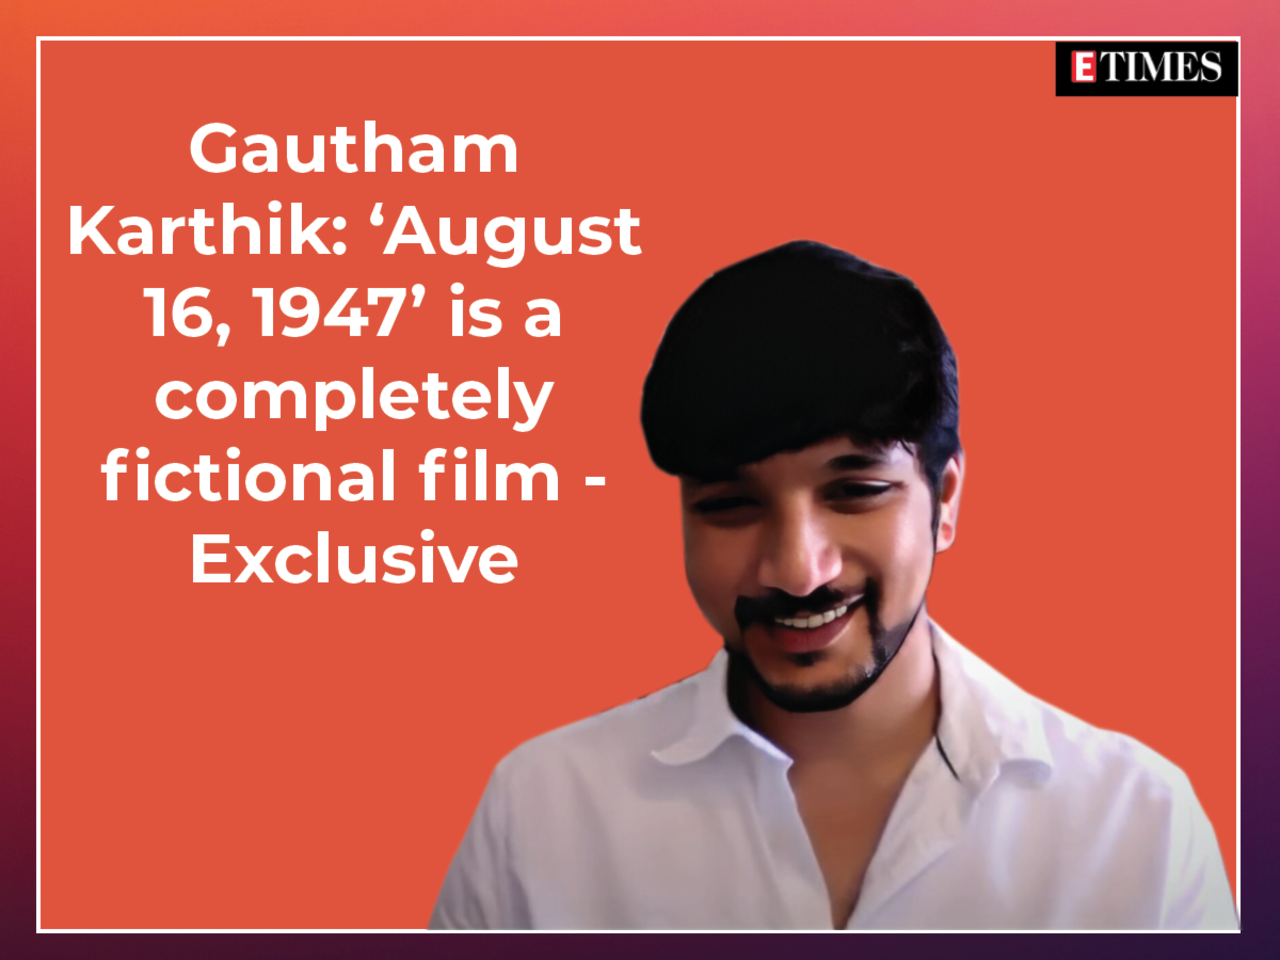 Gautham Karthik: 'August 16, 1947' is a completely fictional film ...